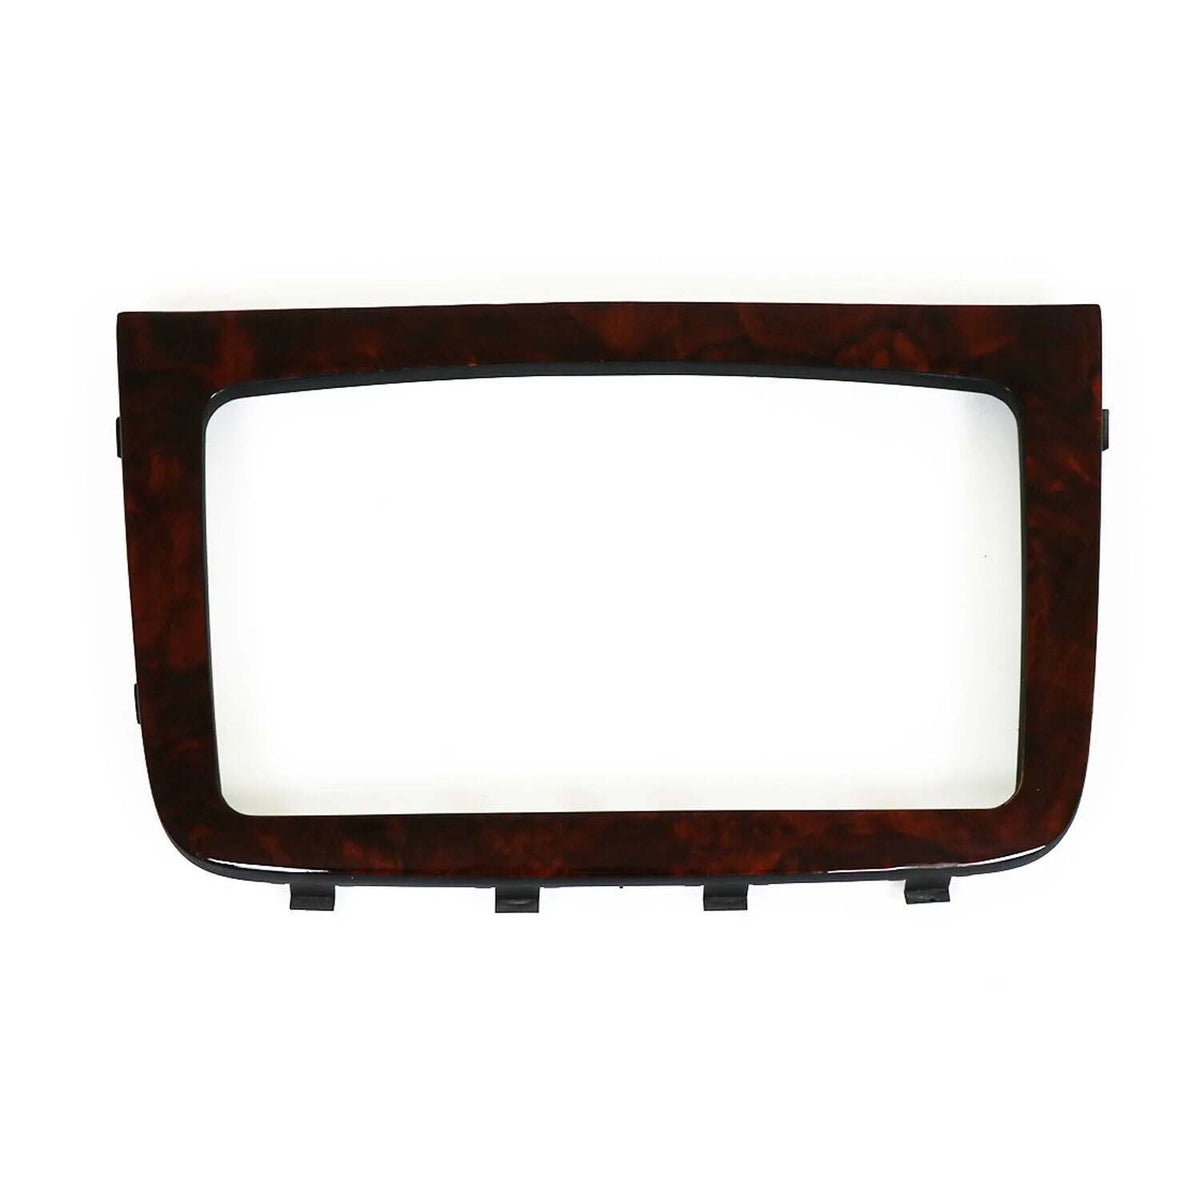 Front console frame cover for Mercedes Vito W639 2003-2014 fine wood walnut